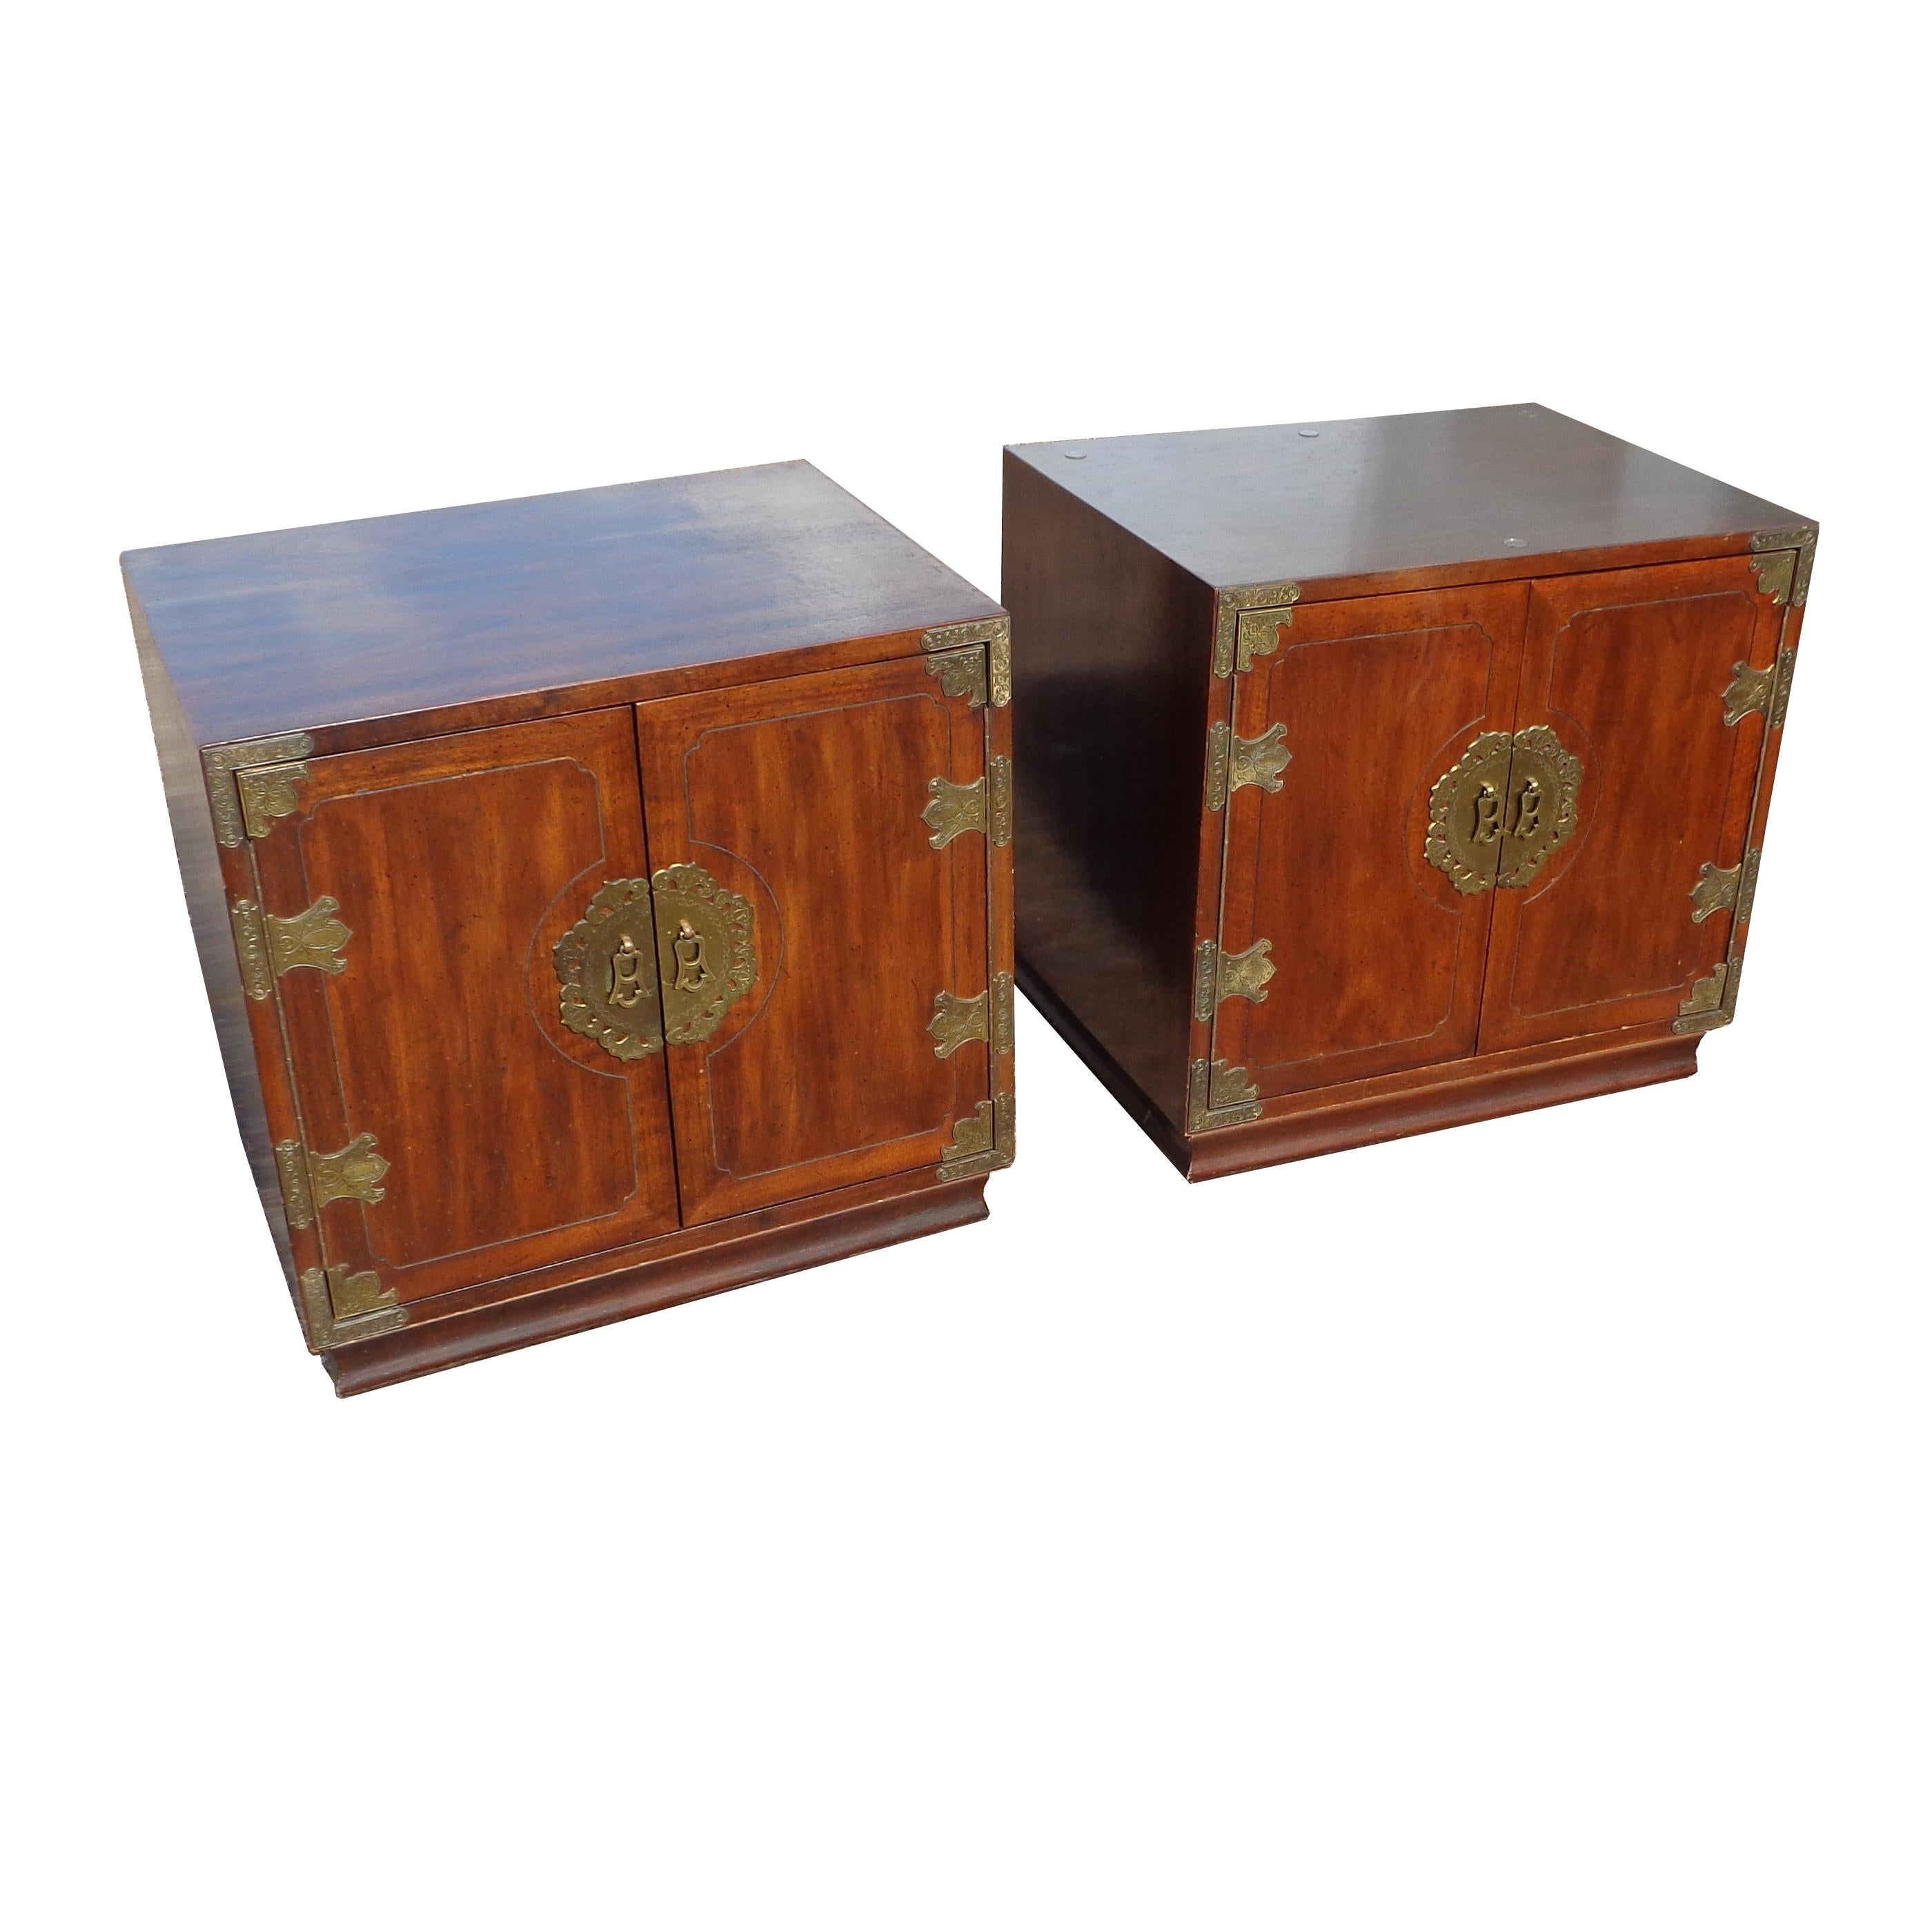 Pair Henredon Tansu campaign nightstands

Pair of nightstands in the Japanese Tansu campaign style. Henredon 1979. Walnut with brass hardware and Ming accents. Featuring double doors with one adjustable wooden shelf.

 